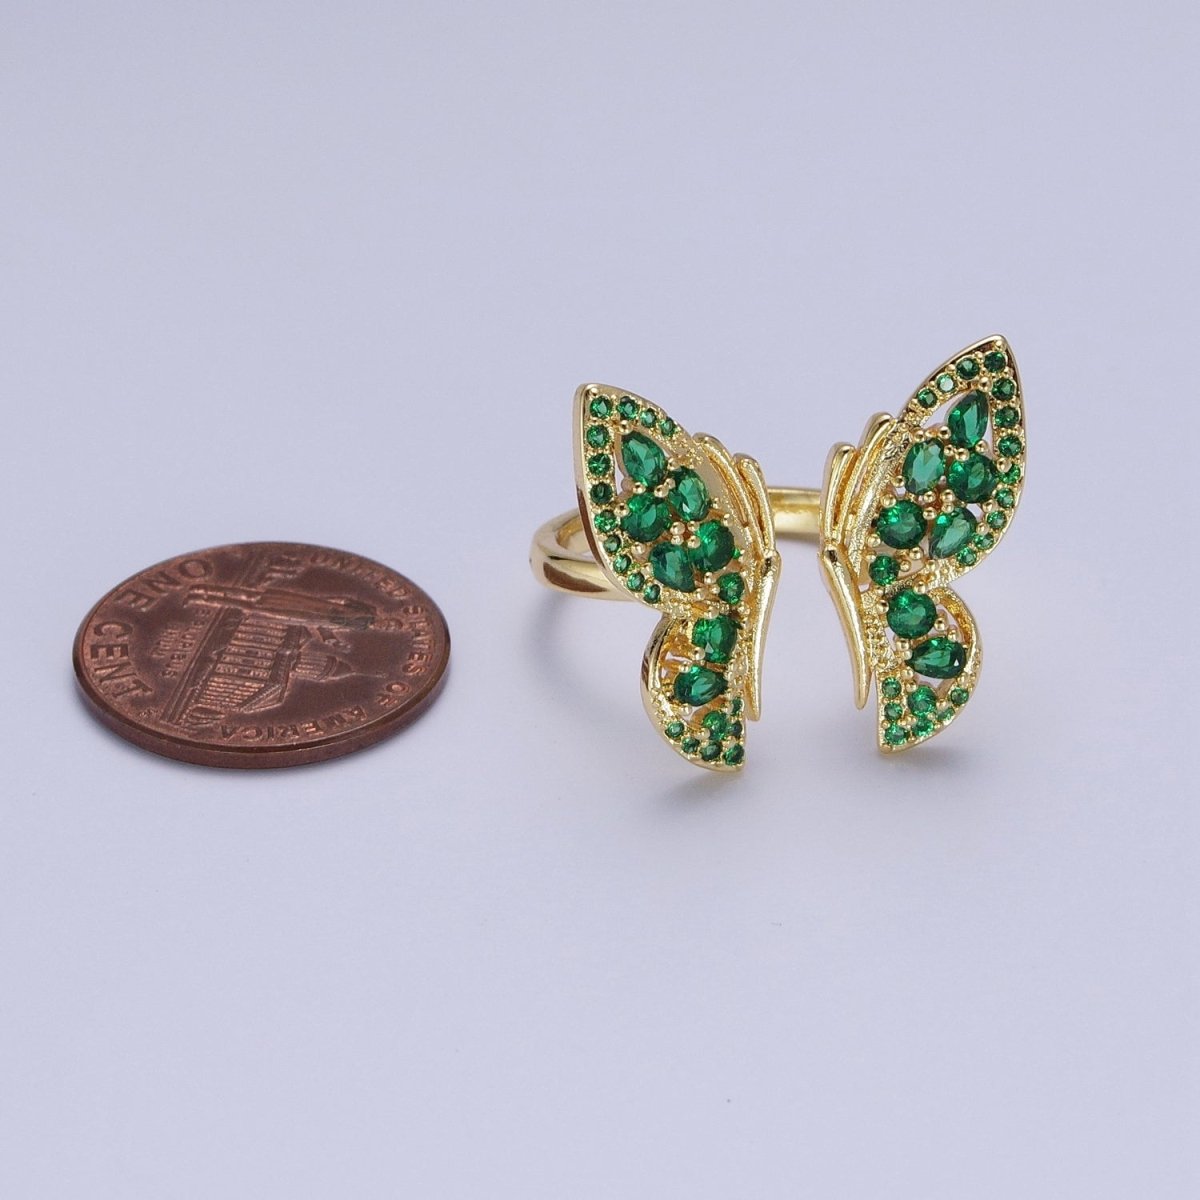 24K Gold Filled Emerald Green Micro Pave Cubic Zirconia Butterfly Mariposa Wings Open Adjustable Ring | X-600 - DLUXCA